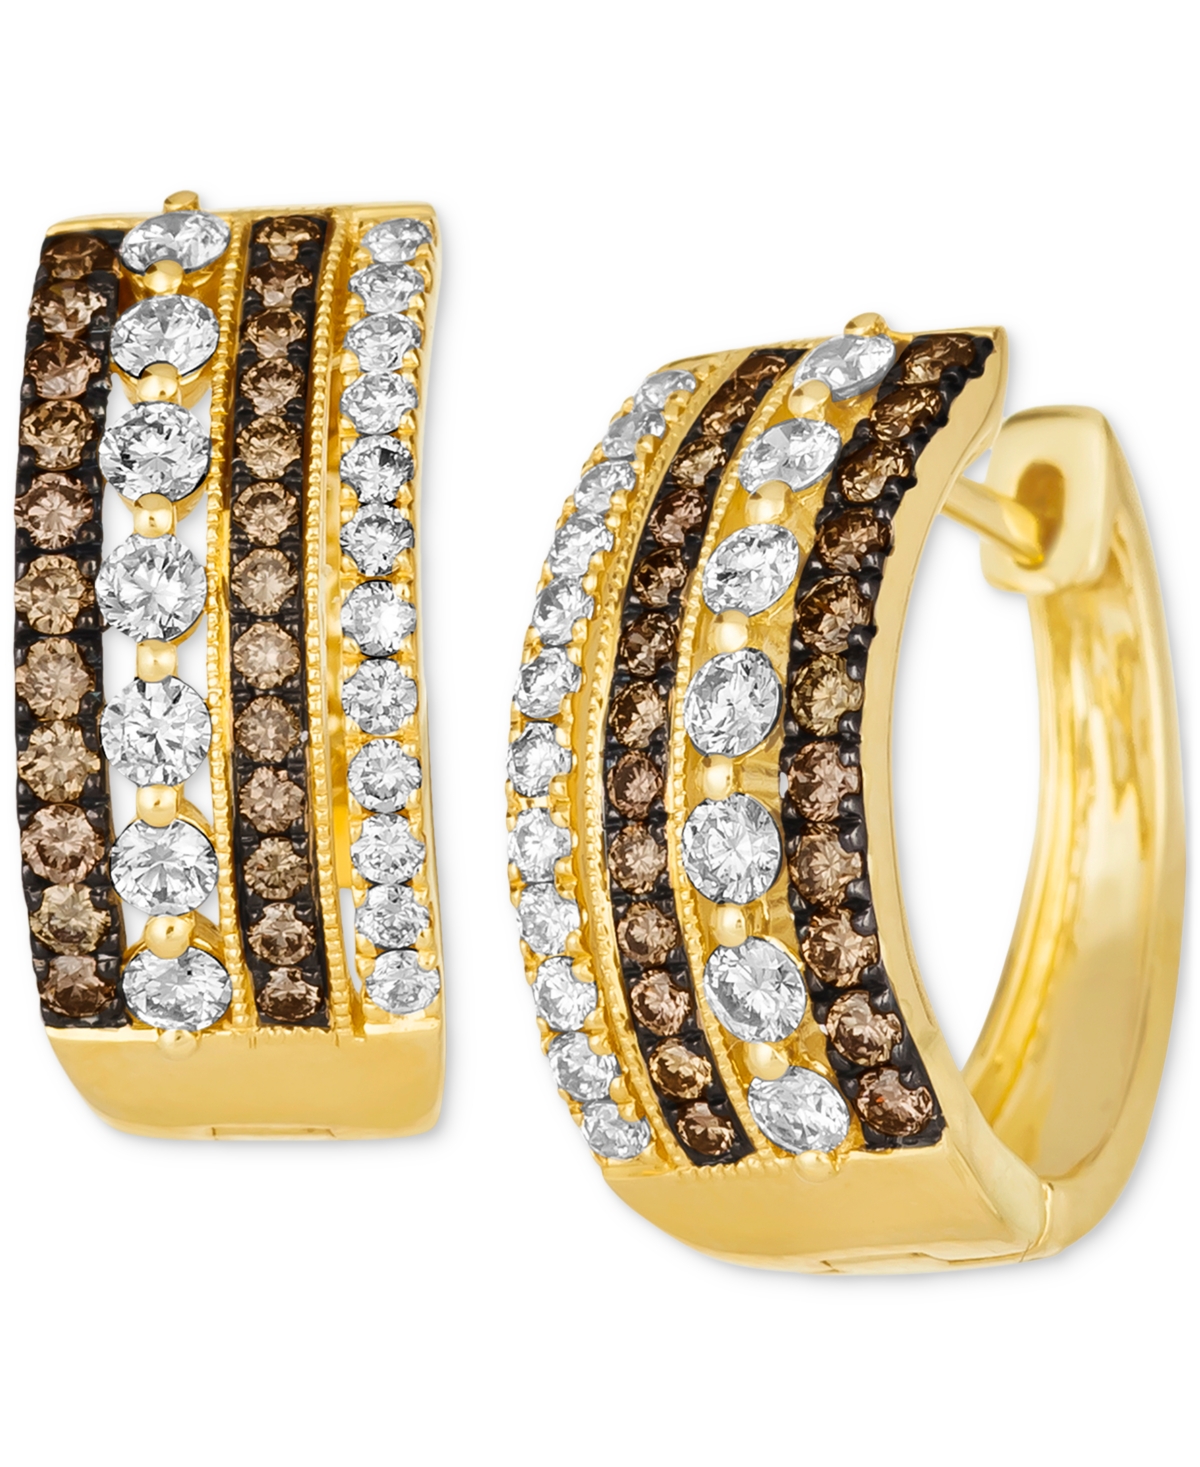 Chocolate Diamond & Nude Diamond Multirow Small Hoop Earrings (1-1/4 ct. t.w.) in 14k Gold, 0.7" (Also Available in Rose Gold) - K Honey Gold